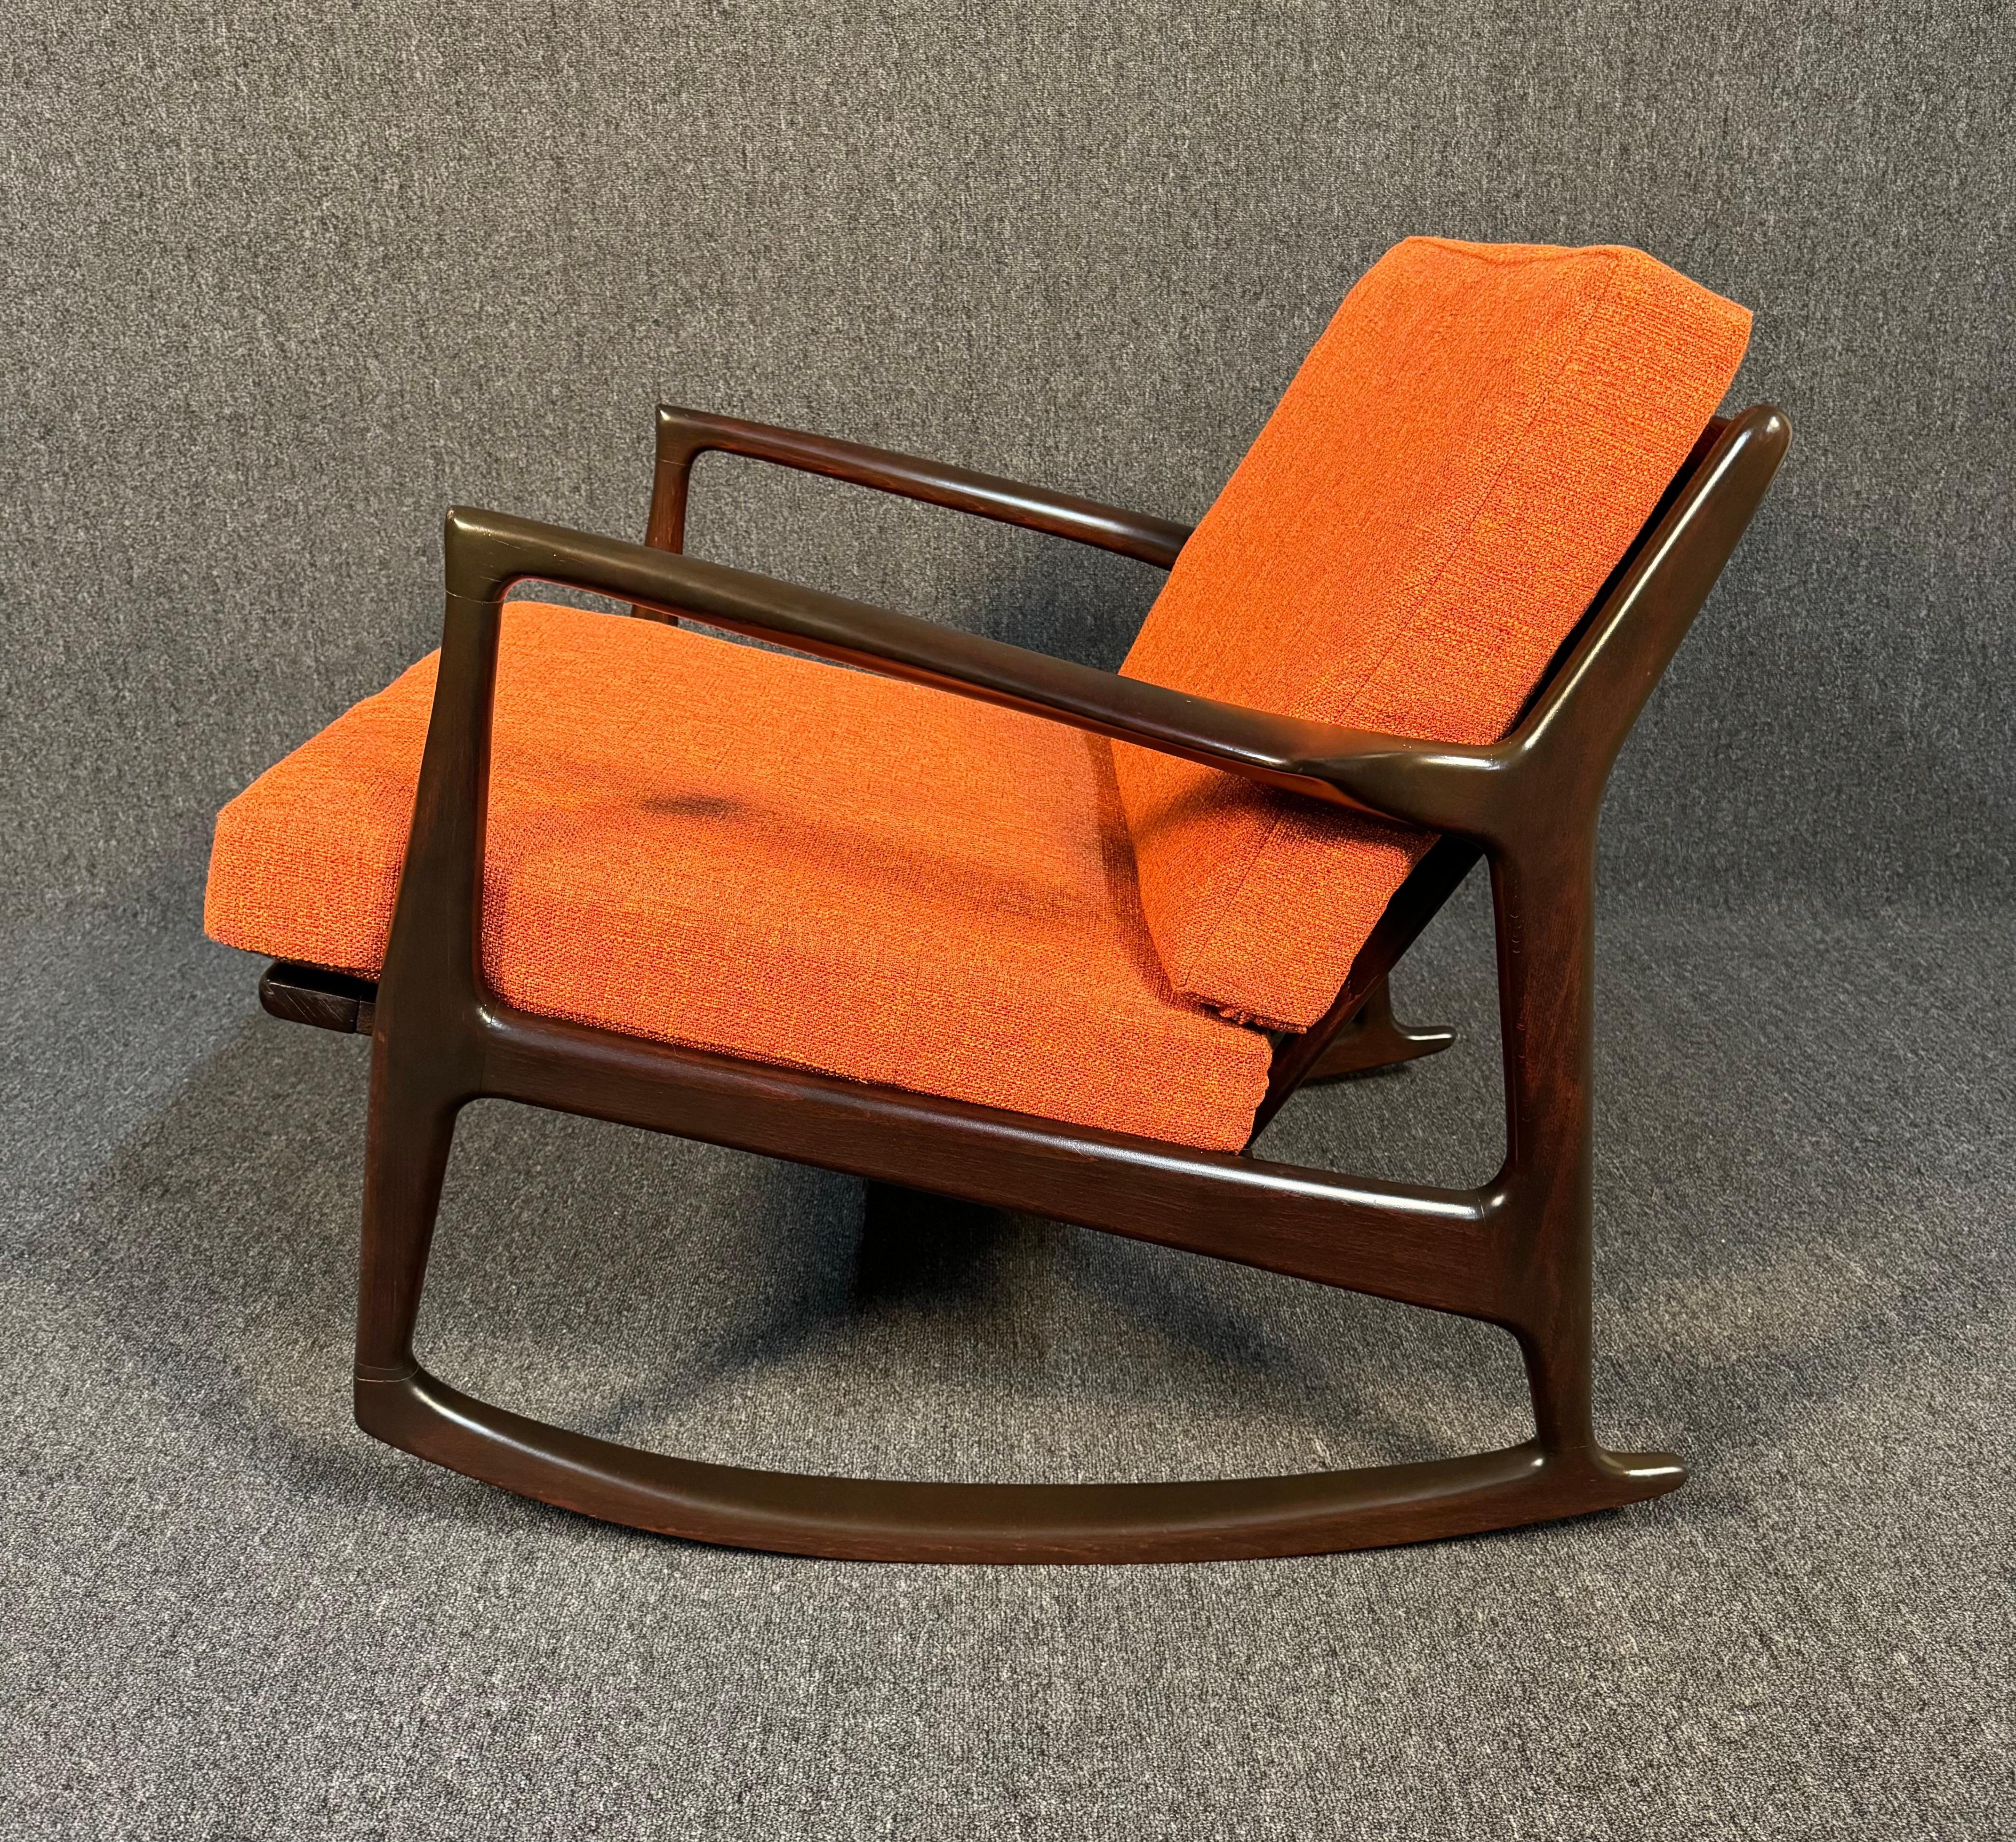 Woodwork Vintage Danish Mid Century Modern Rocking Chair by Kofod Larsen for Selig For Sale